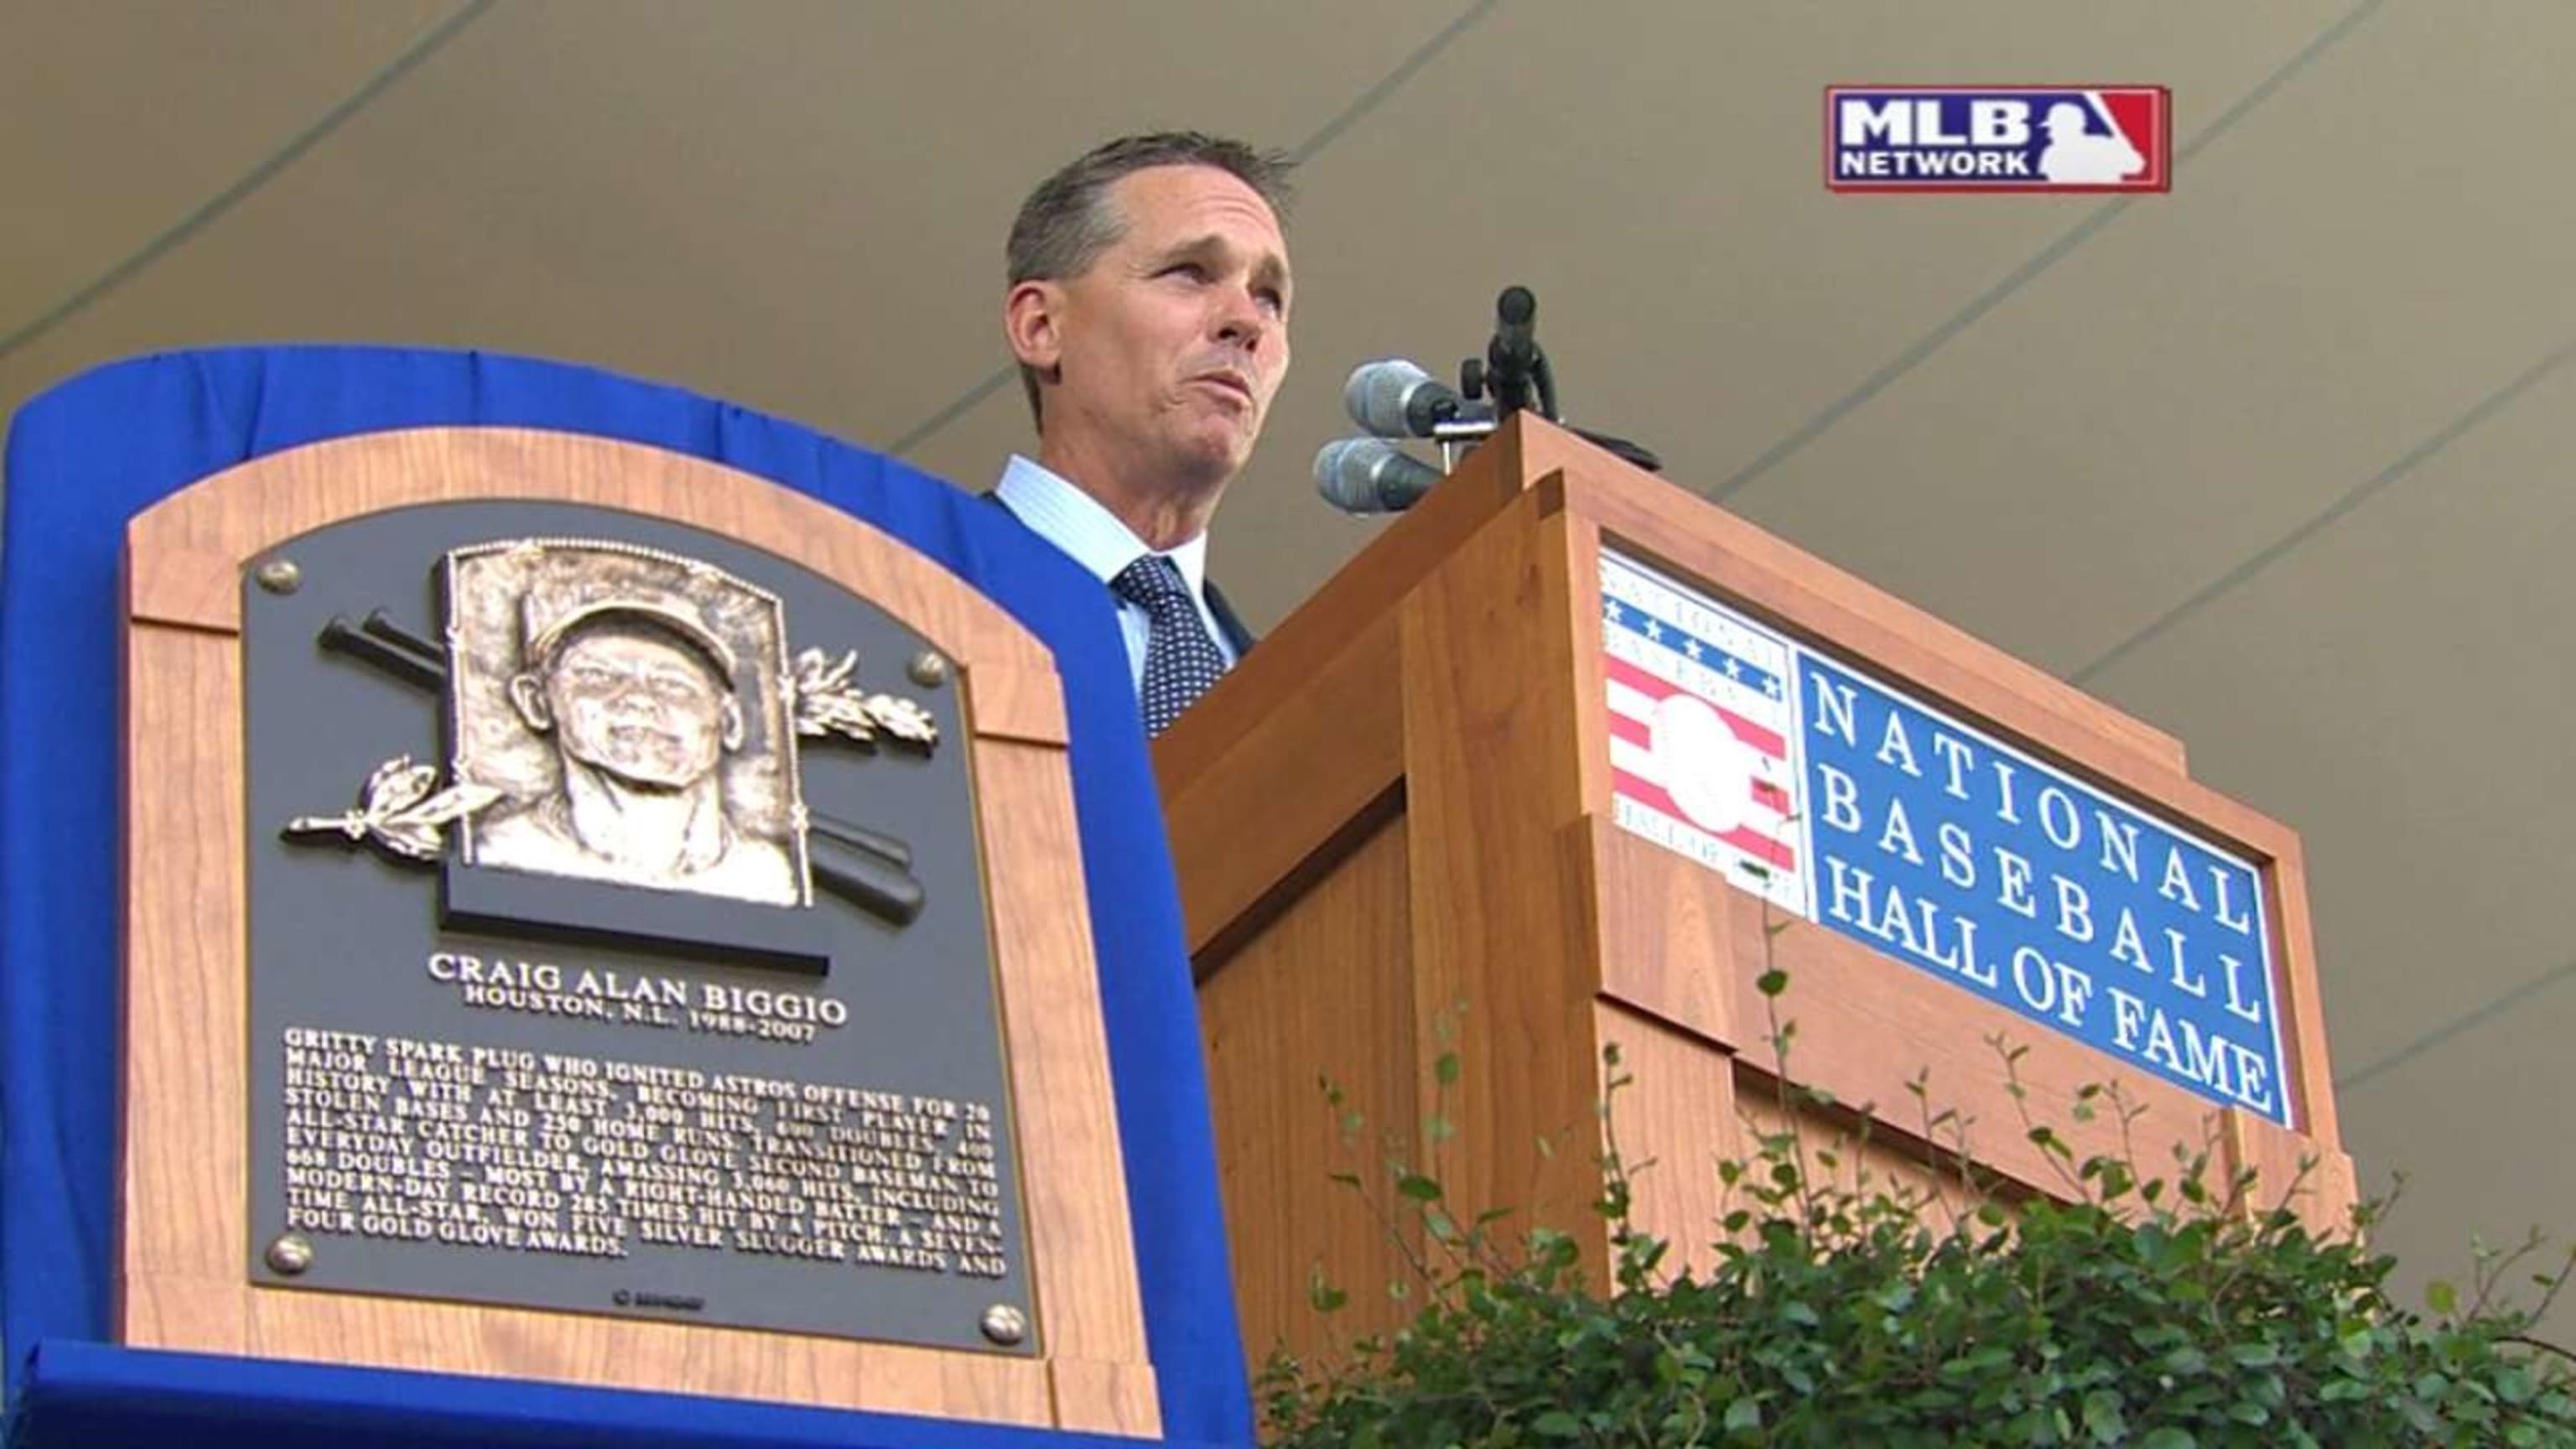 Video: Craig Biggio on becoming the first Astros player to be elected to  the Hall of Fame - NBC Sports